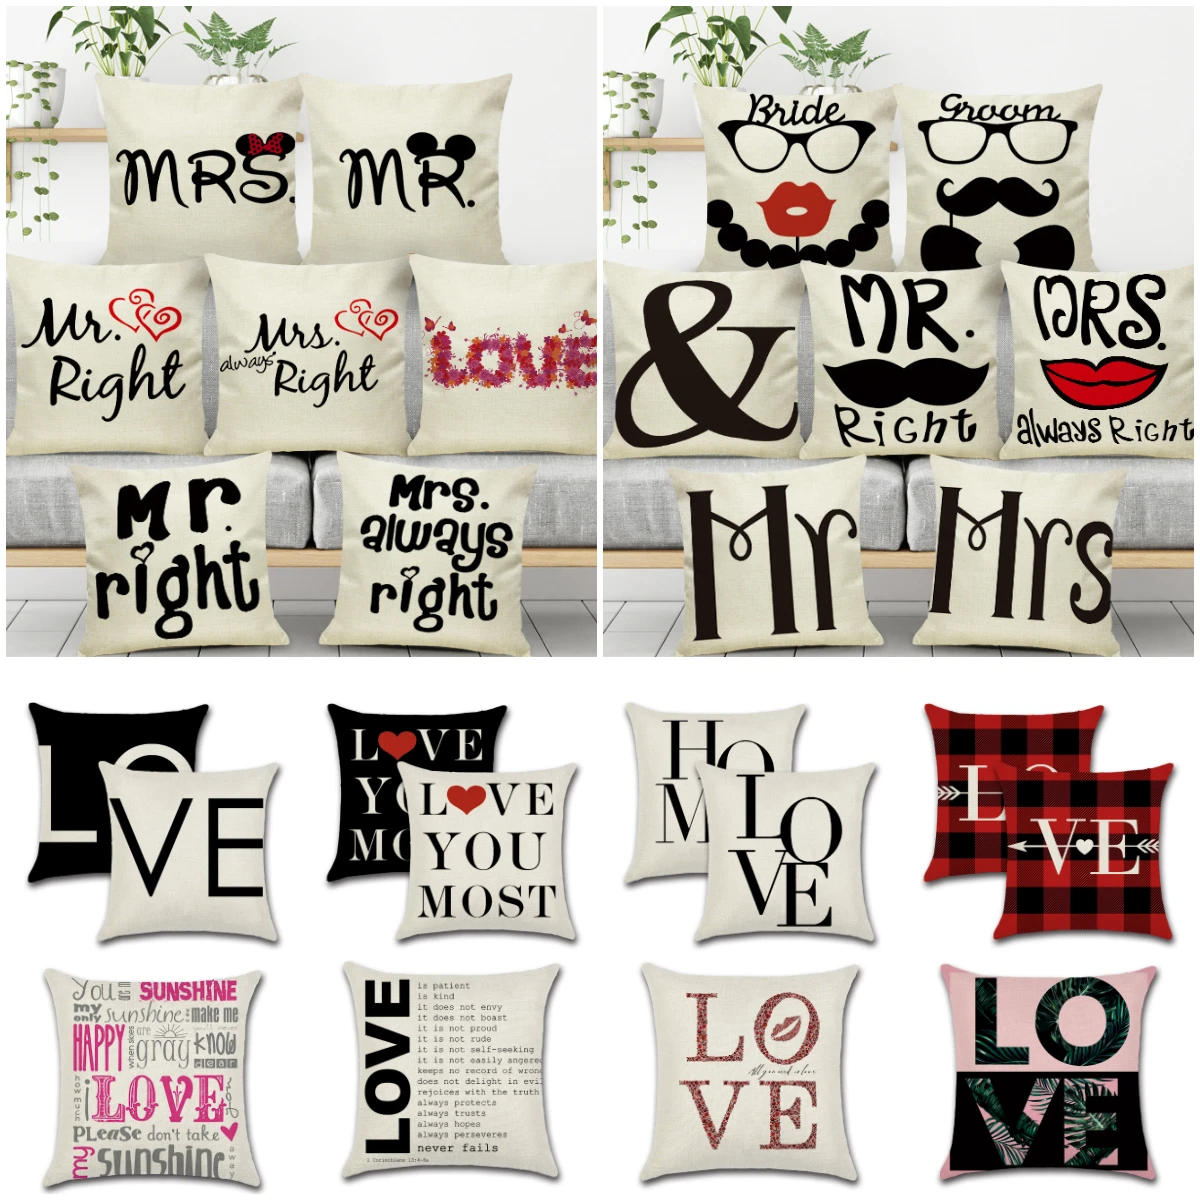 

Mr. Mrs. Right Wedding Cushion Cover Valentine Lovers Linen Pillows Case Modern Nordic Sofa Couch Decorative Throw Pillows Cover